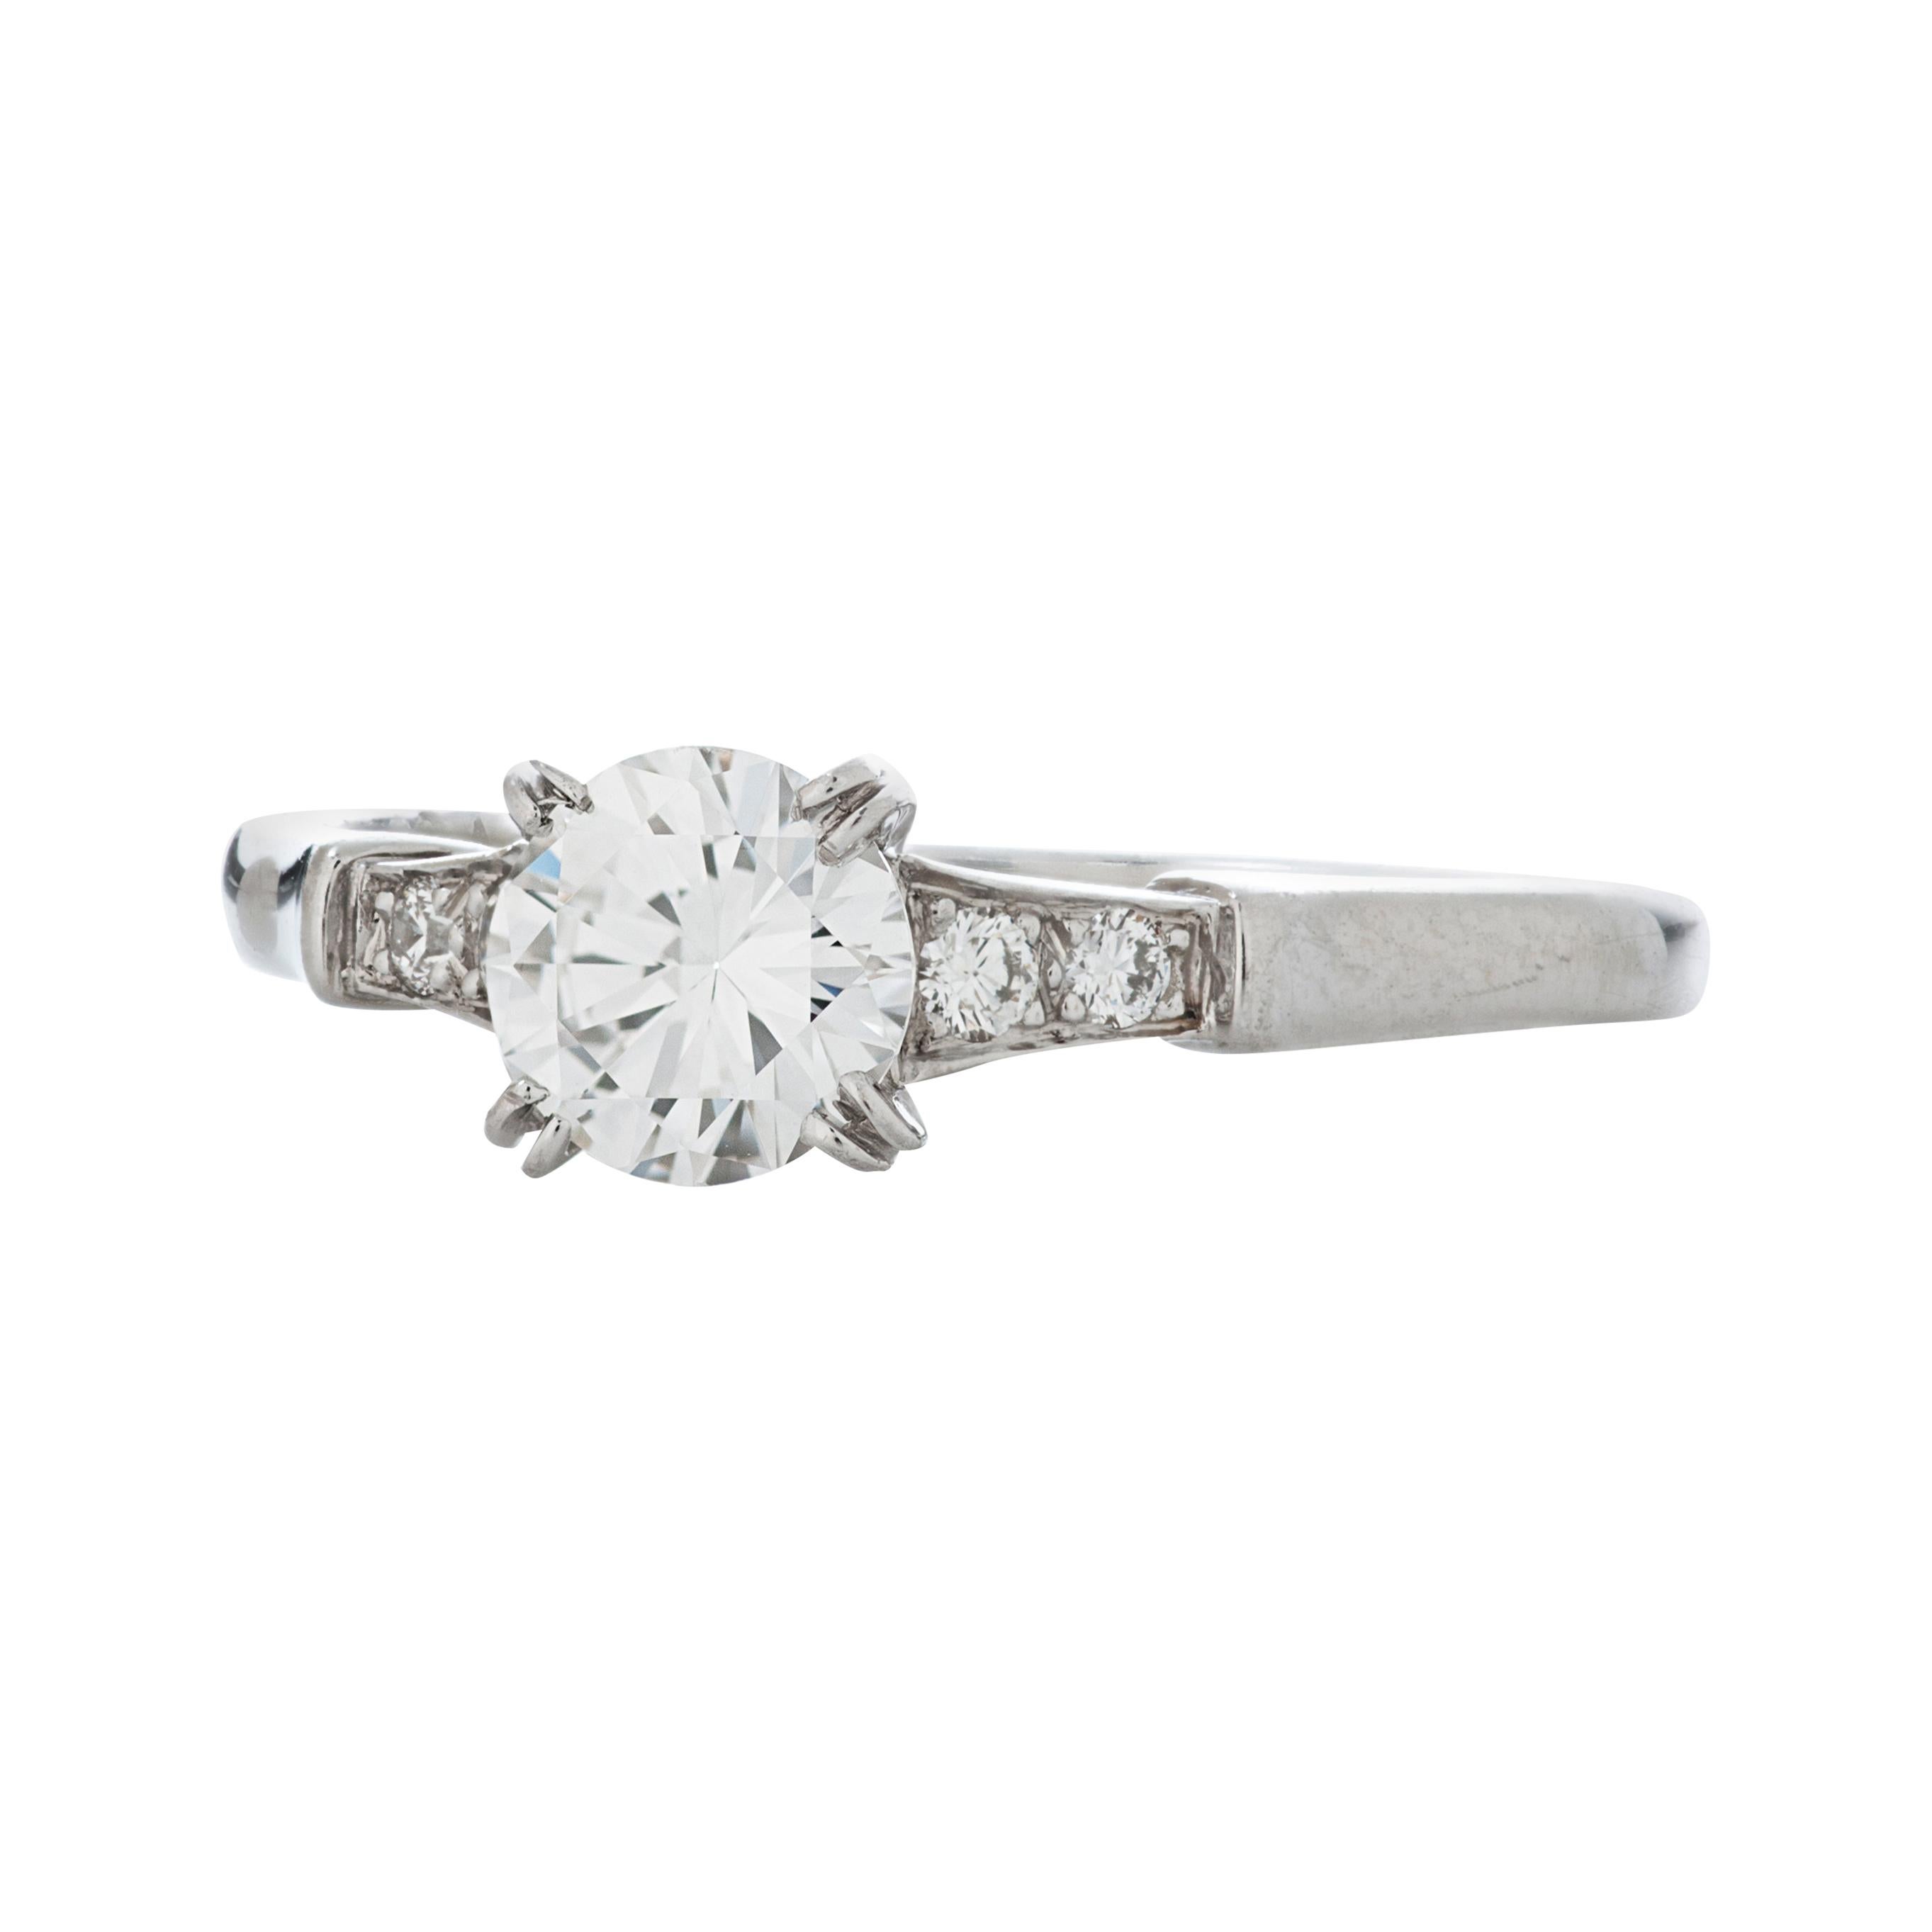 J.E. Caldwell & Co. 0.57ct E/VVS2 GIA Round Diamond Engagement Ring in Platinum For Sale